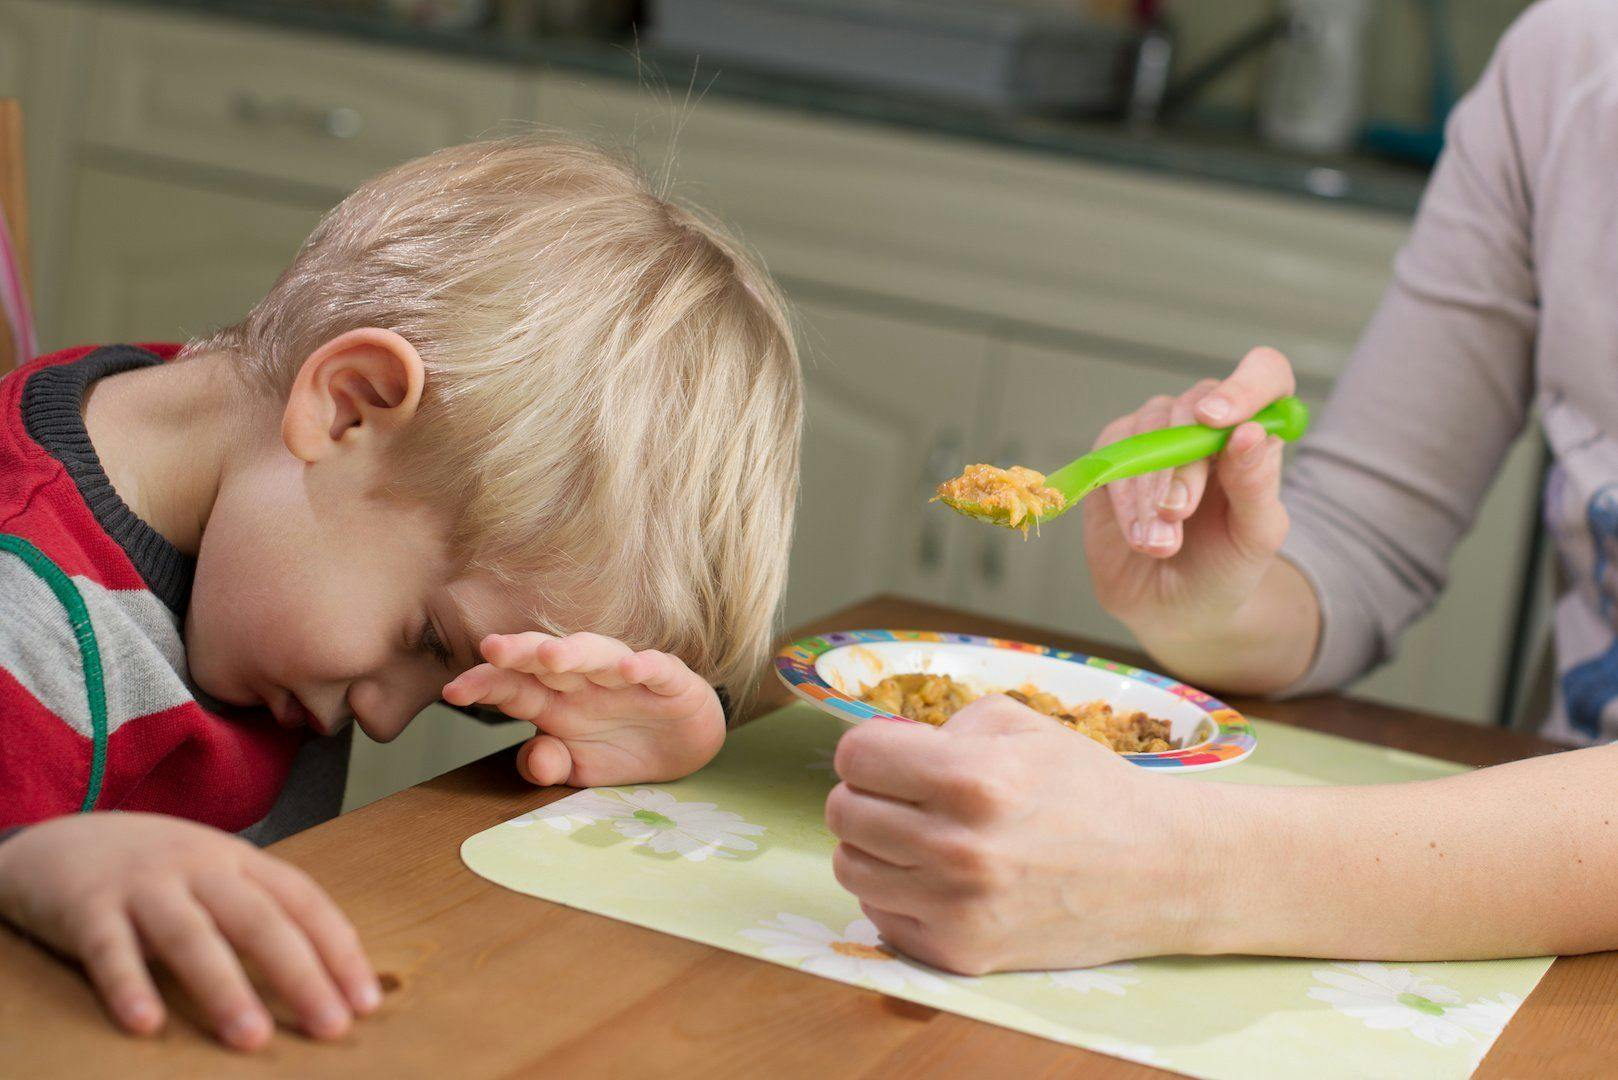 Parents of picky eaters need education and understanding